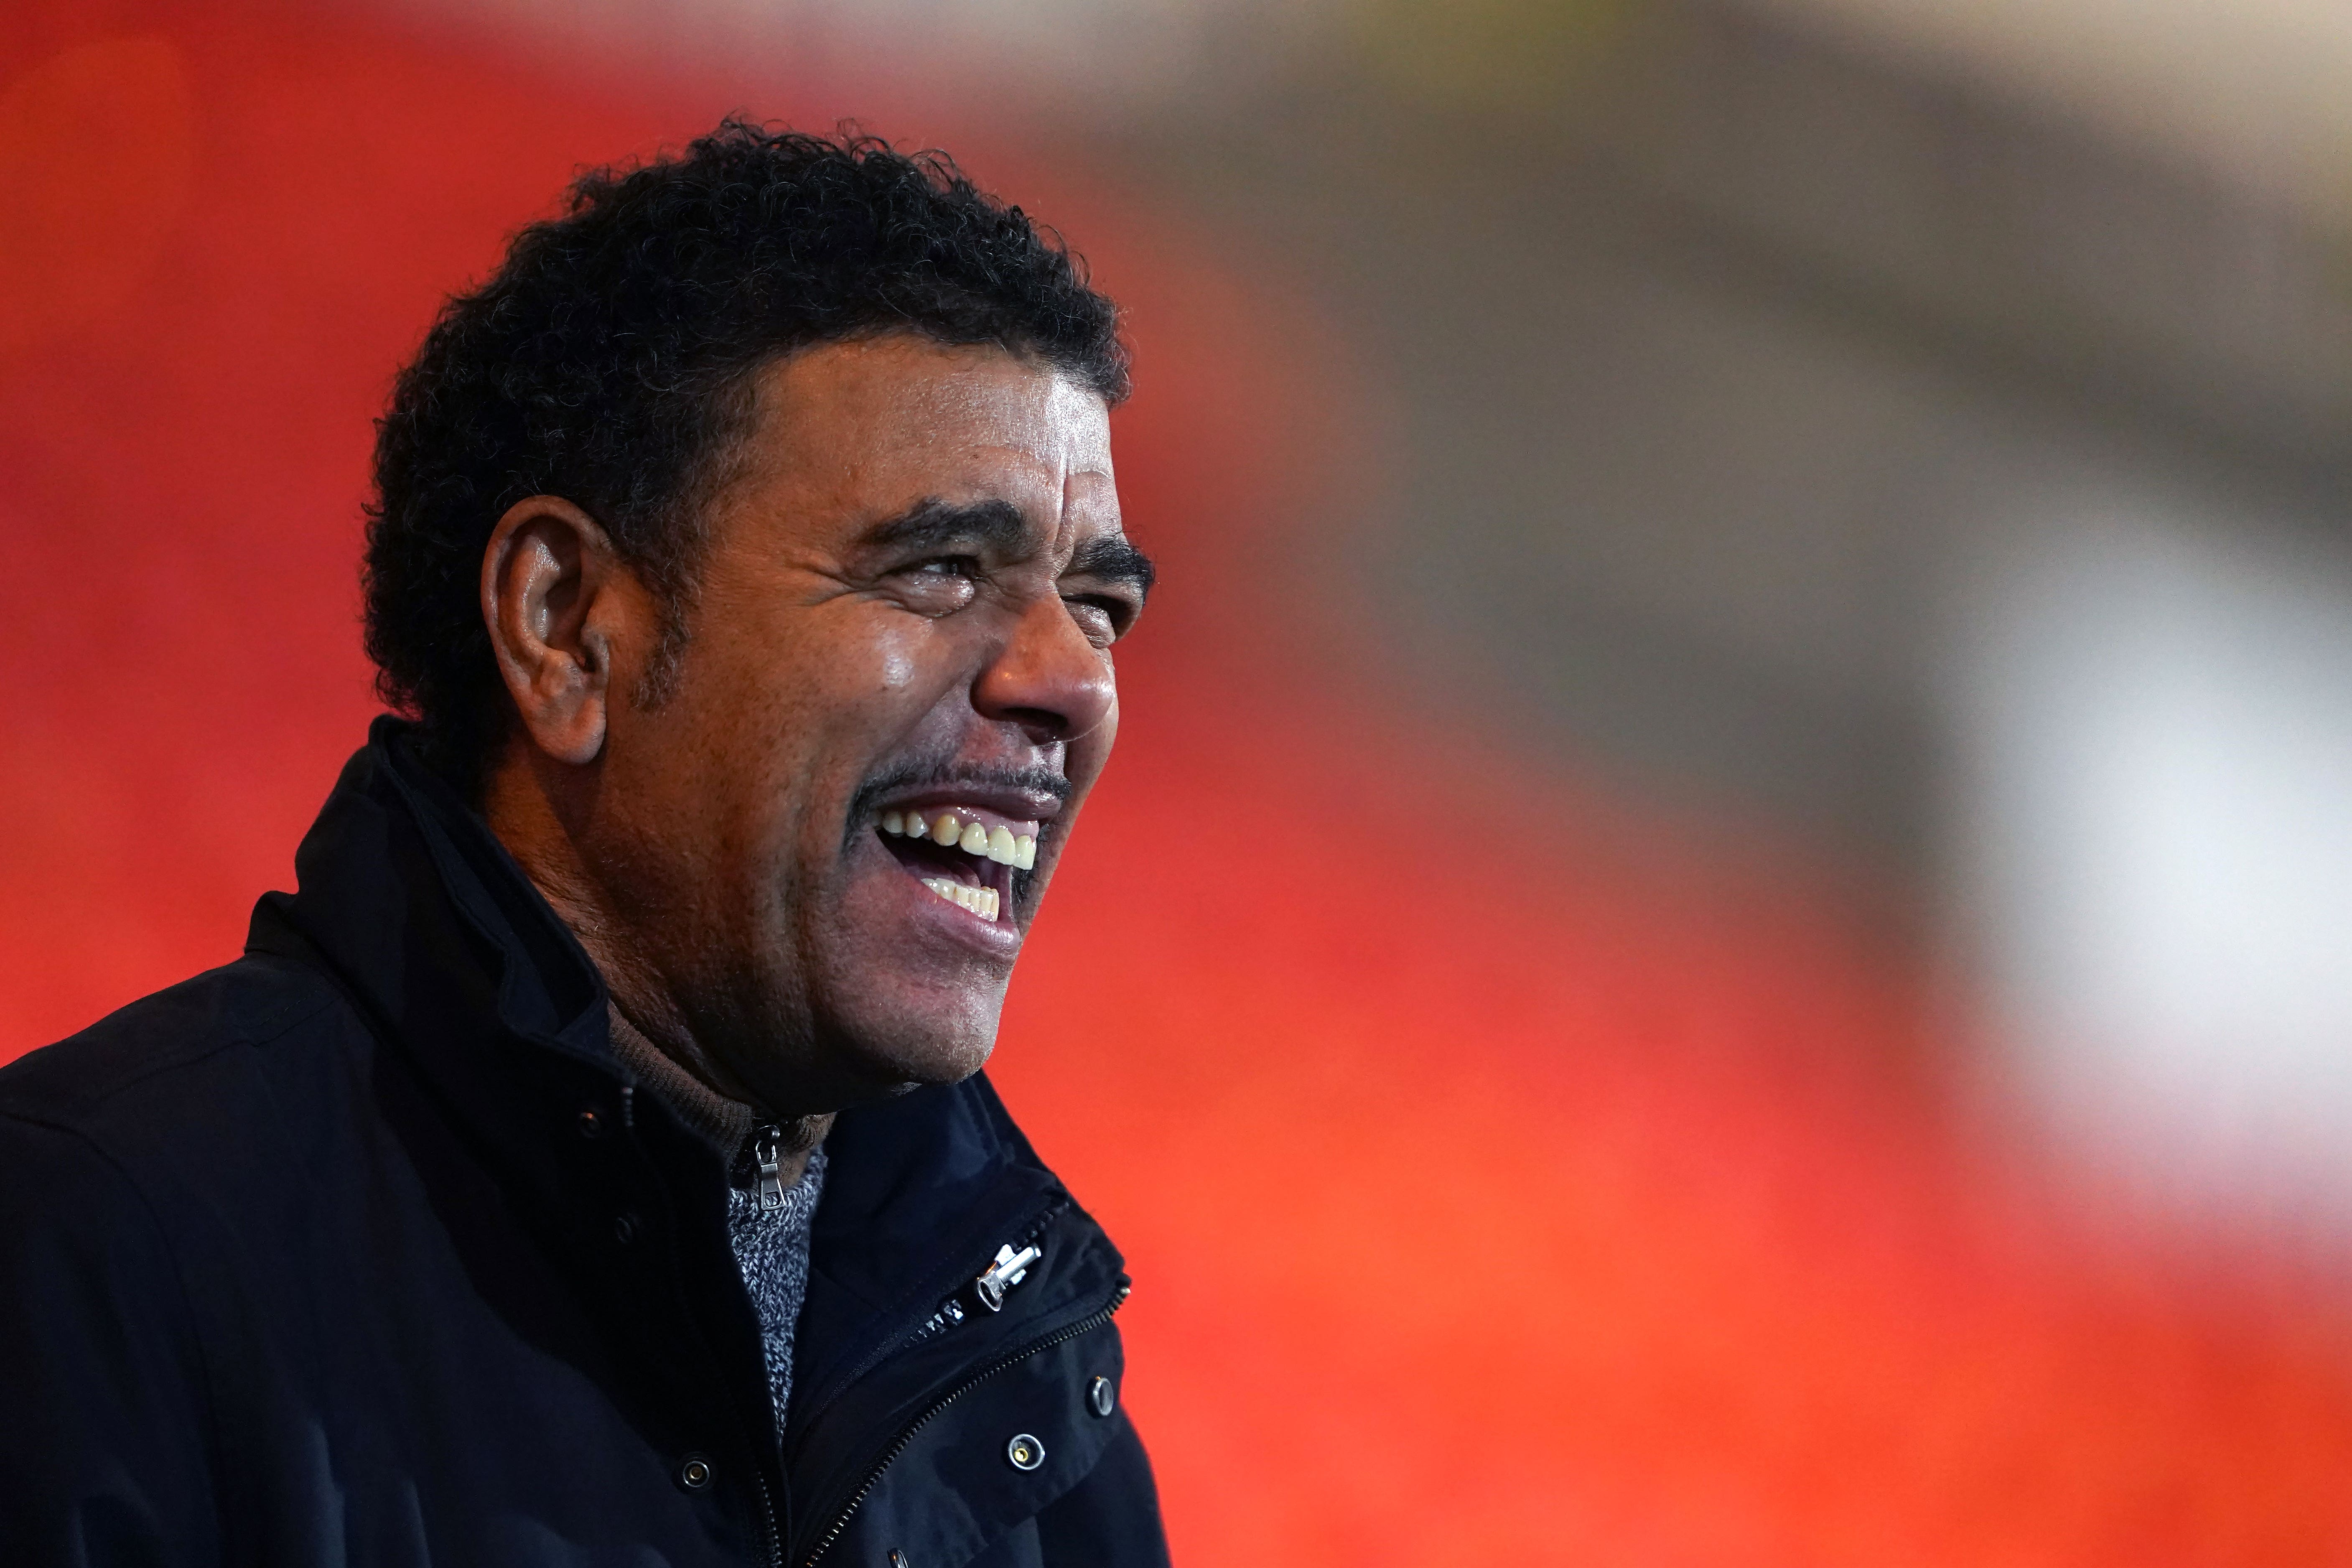 Chris Kamara was a popular pundit on Sky’s Soccer Saturday programme for 24 years